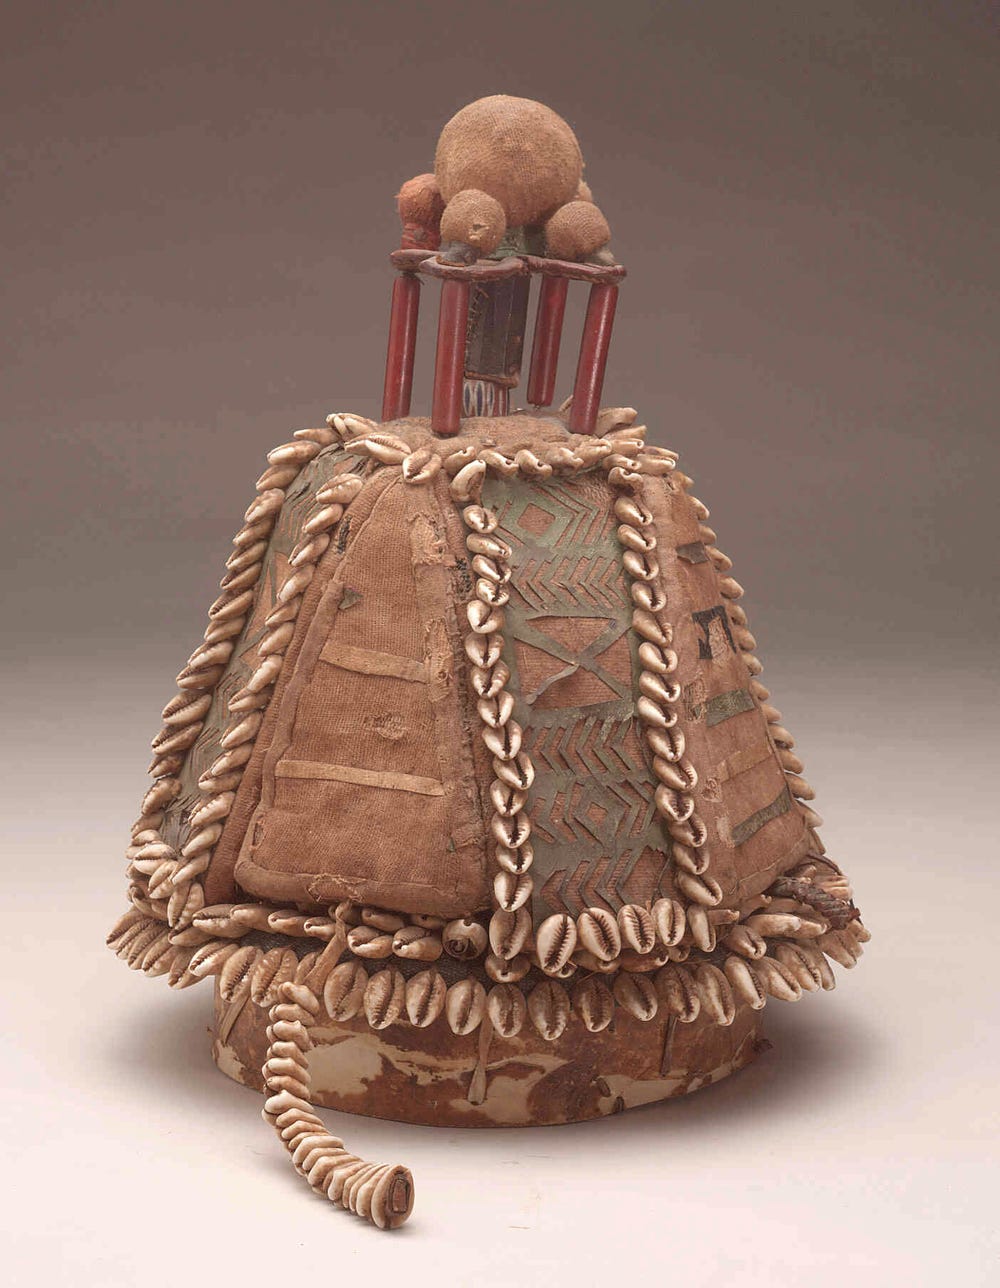 Vessel covered in shells, leather, and beads